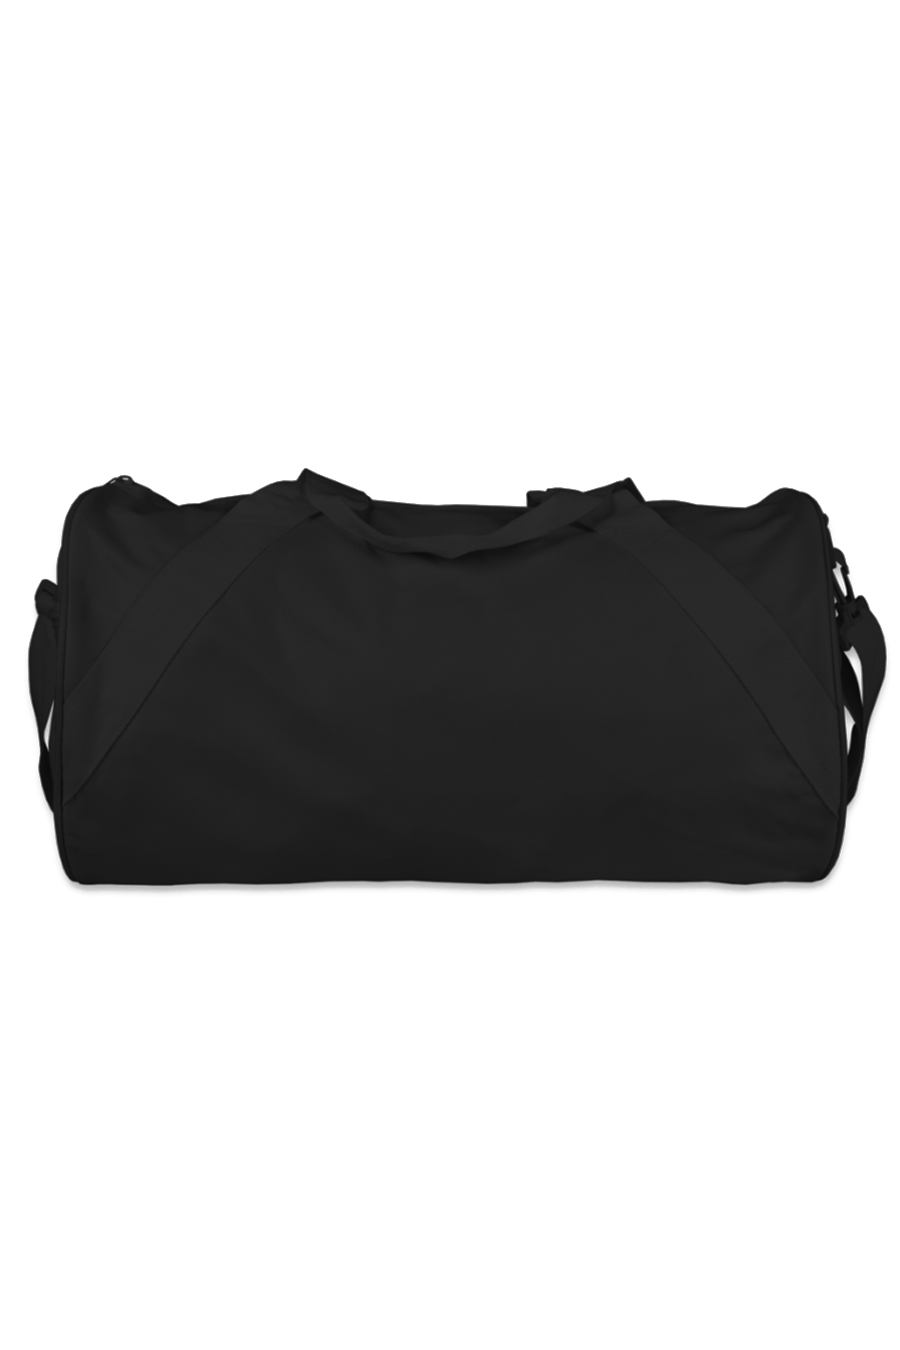 Not Yours Duffel Bag | Black - Main Image Number 2 of 2